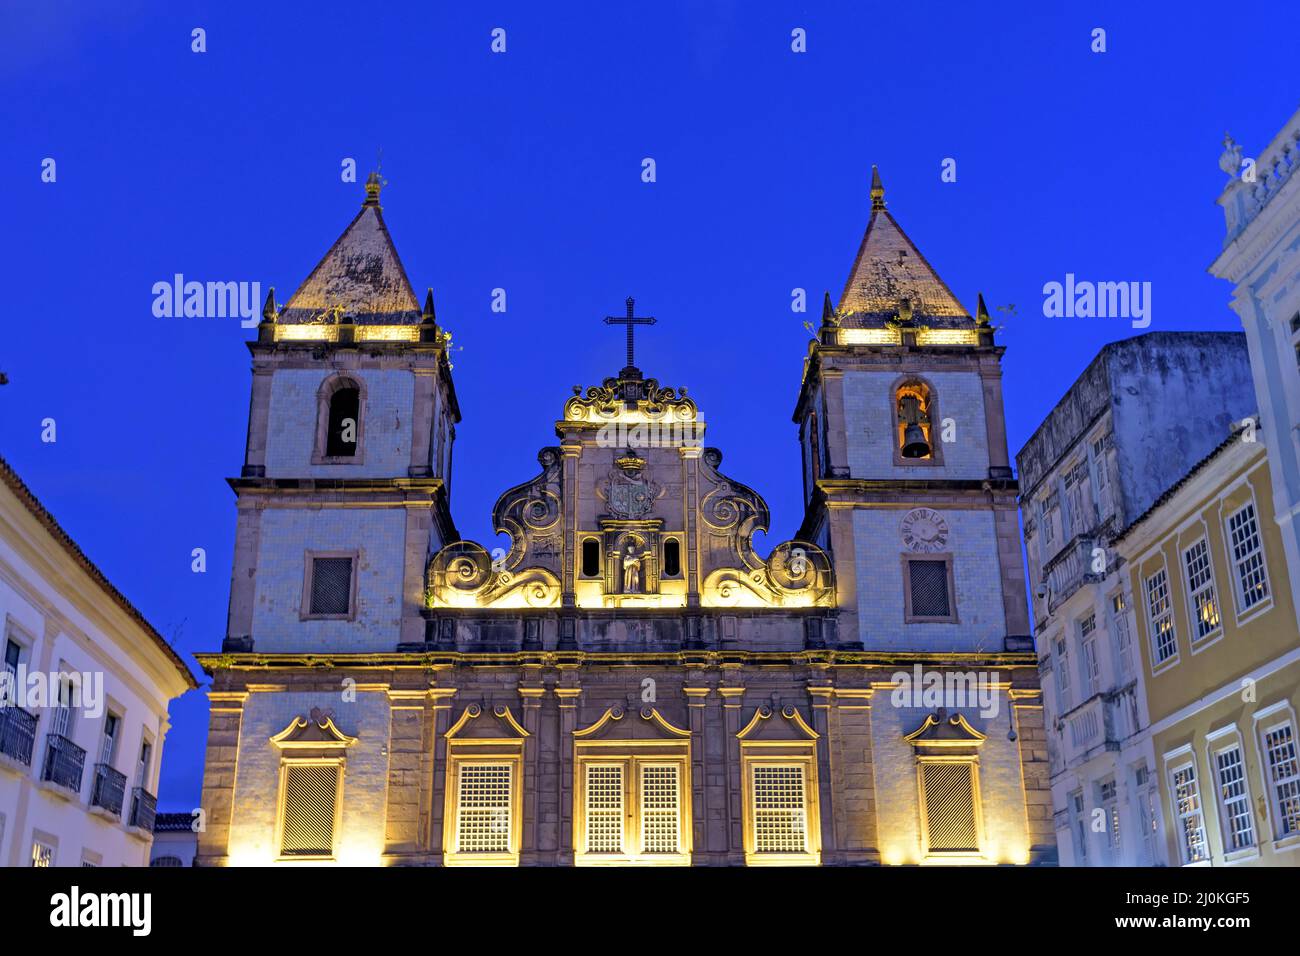 Illuminated facade of an ancient and historic church located in Salvador, Bahia Stock Photo